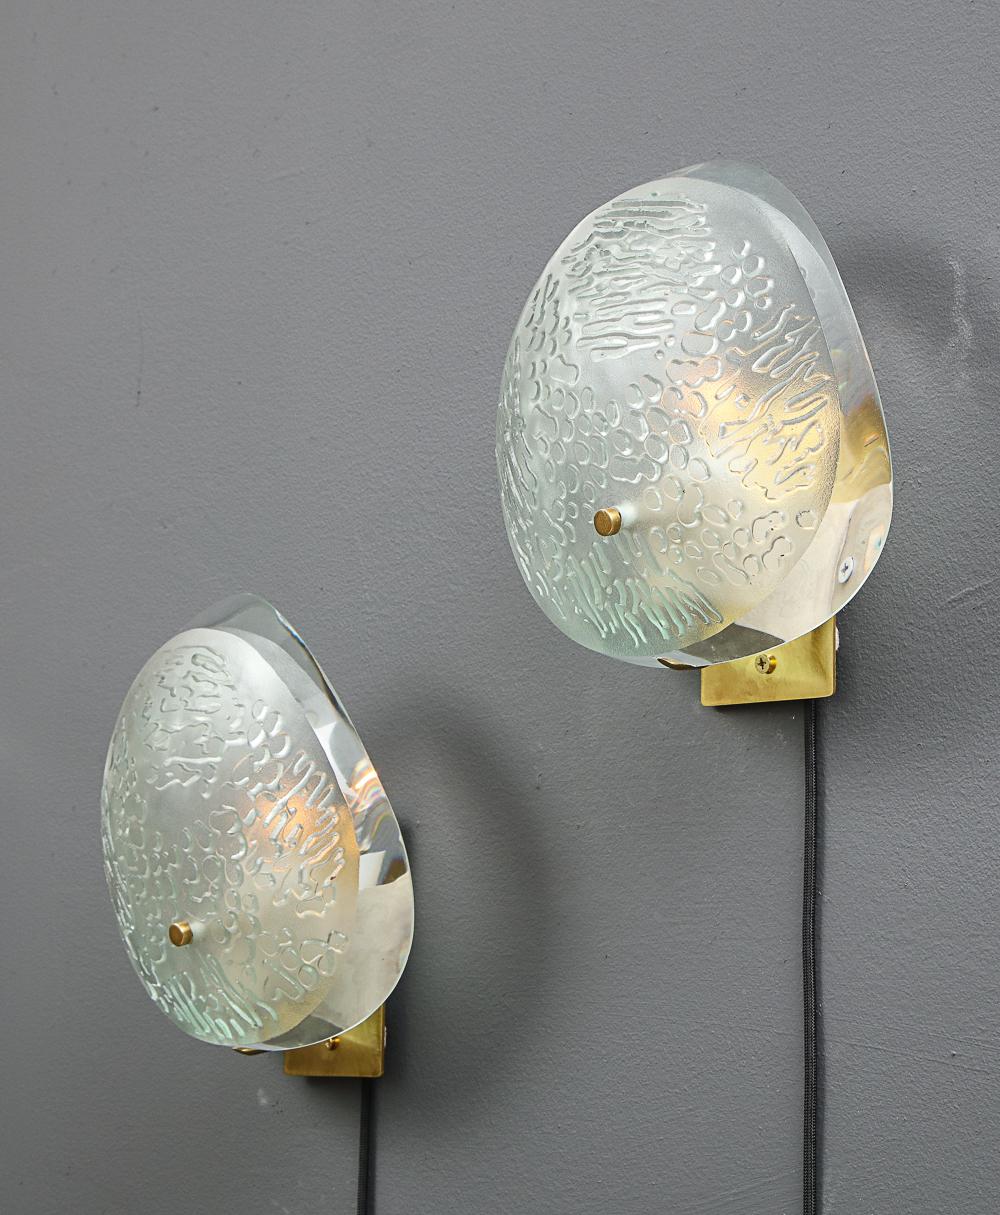 Mid-20th Century Pair of Sconces #2199 by Max Ingrand for Fontana Arte